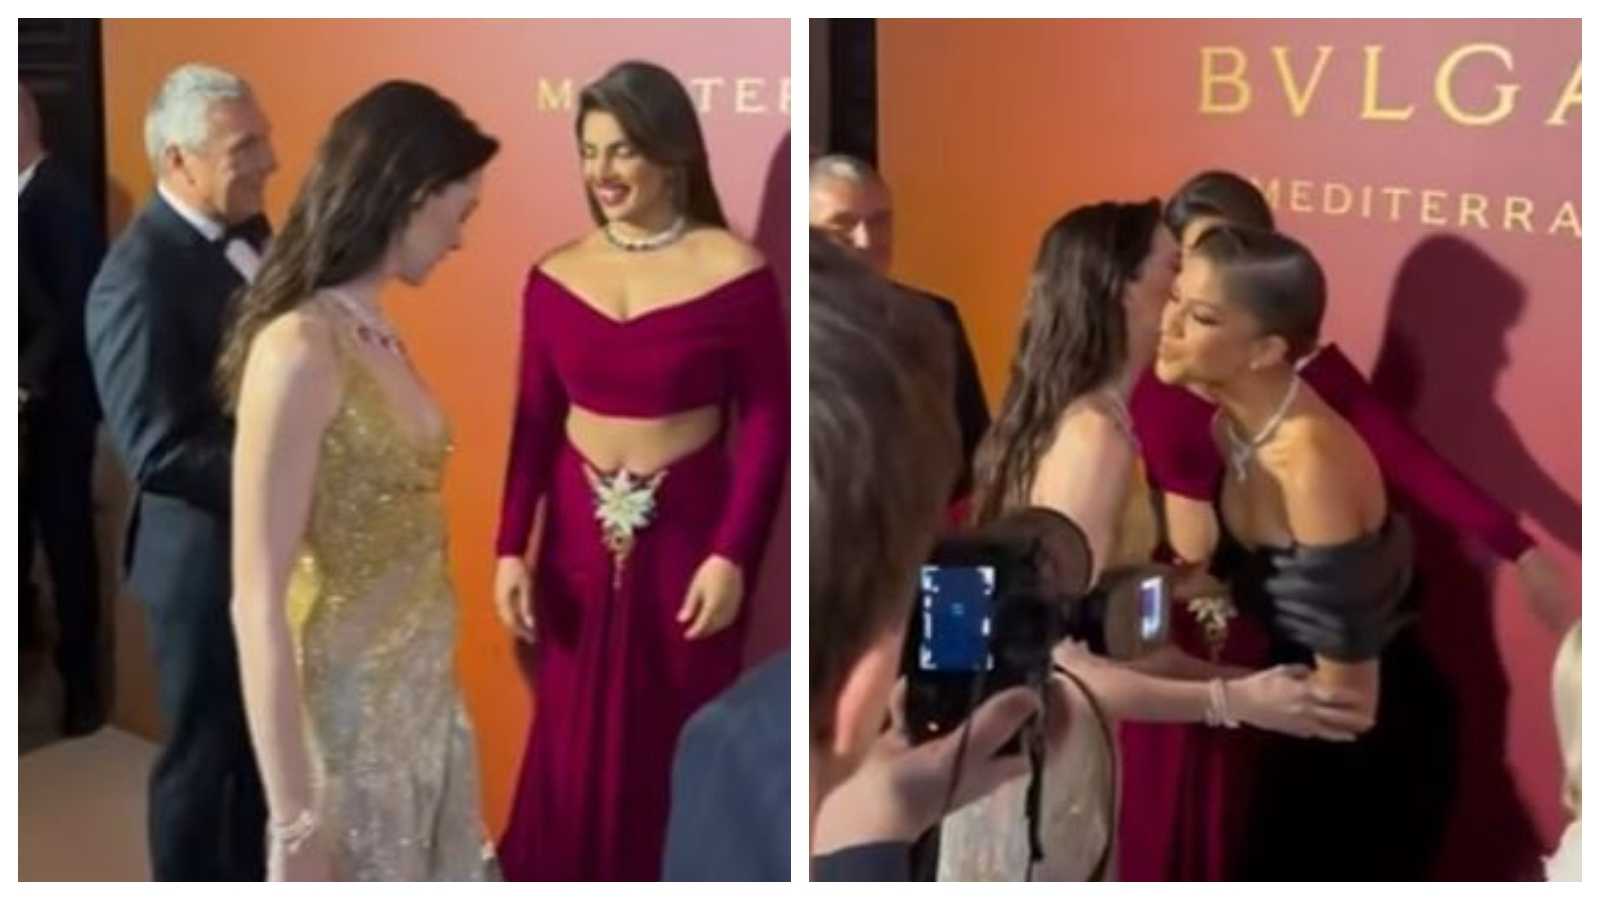 Priyanka Chopra Jonas ignored by Anne Hathaway at Venice event? Netizens stand divided